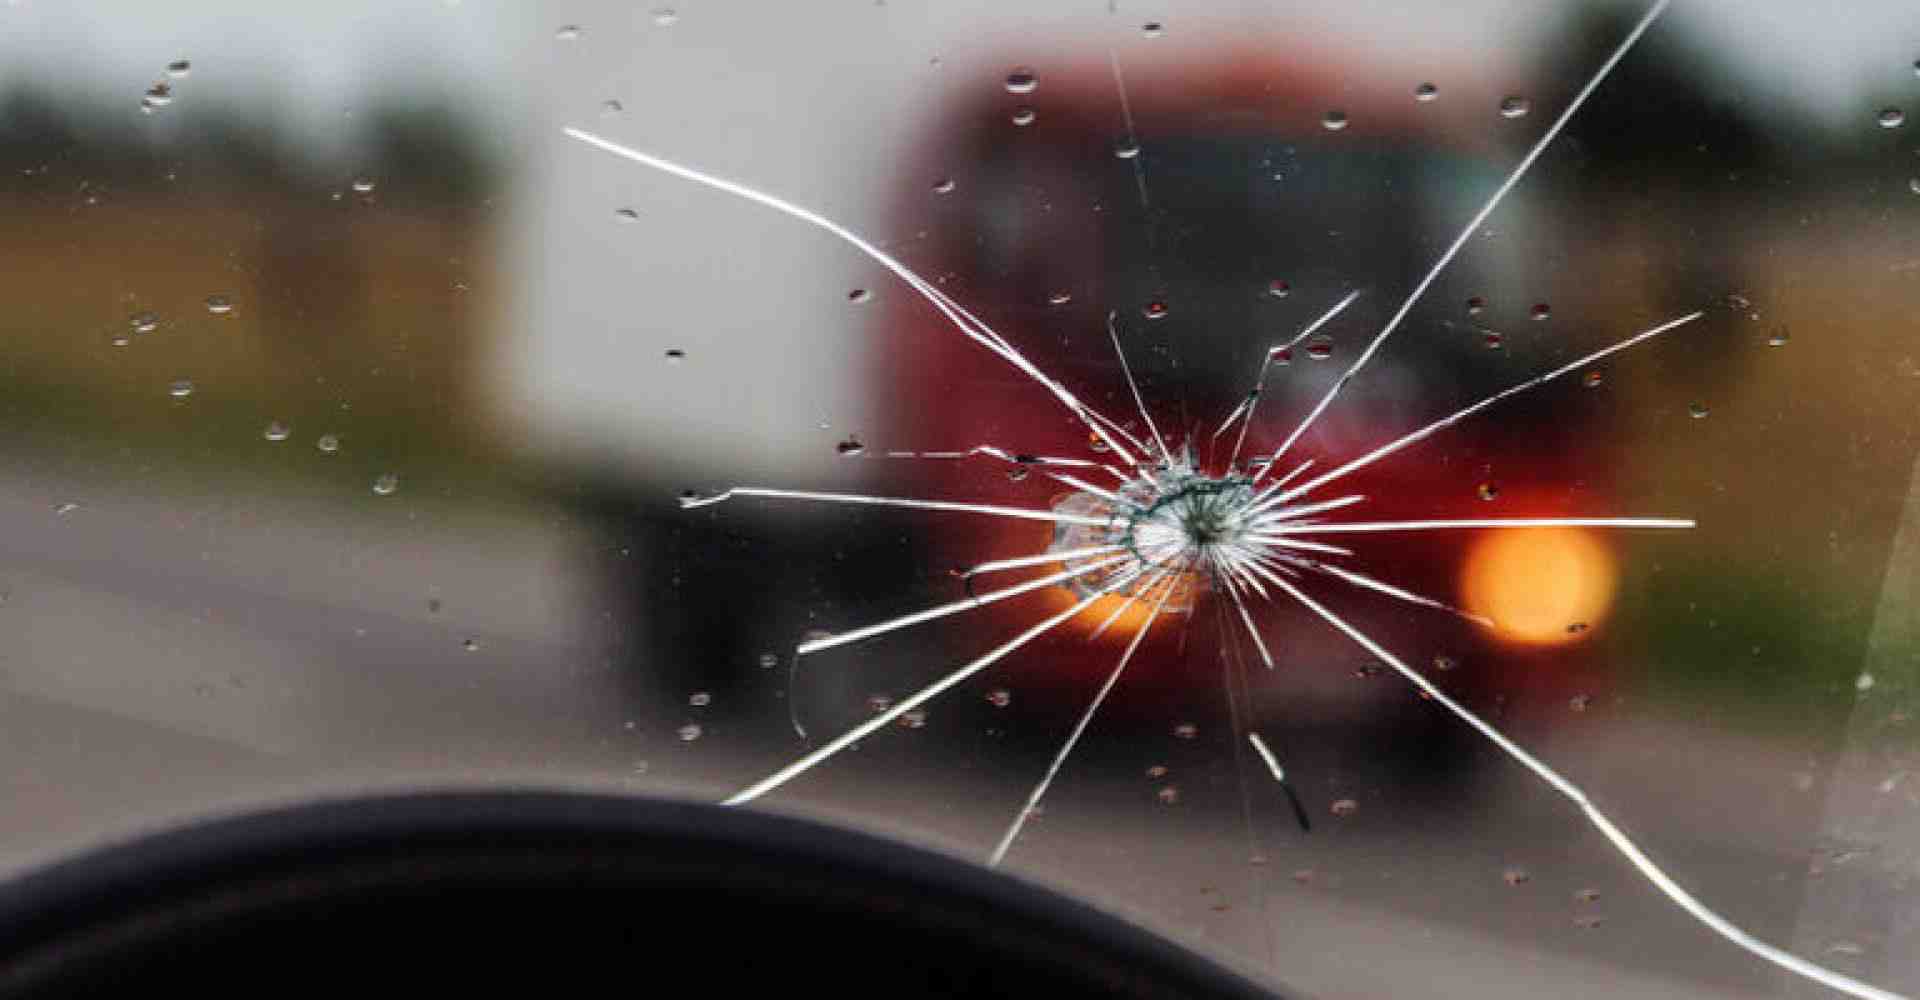 Will my insurance go up if I claim for a windshield?